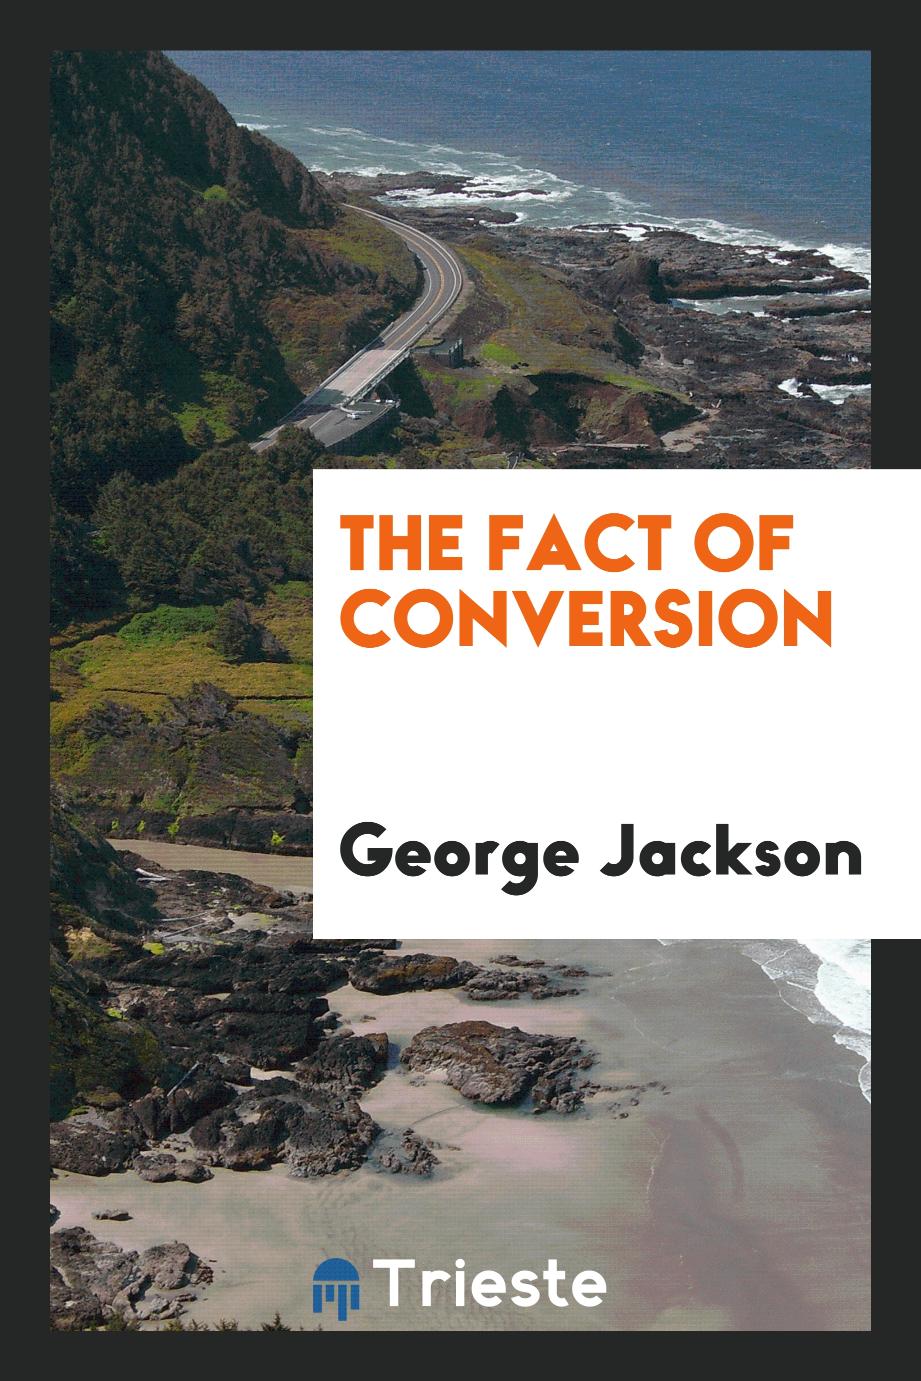 The fact of conversion